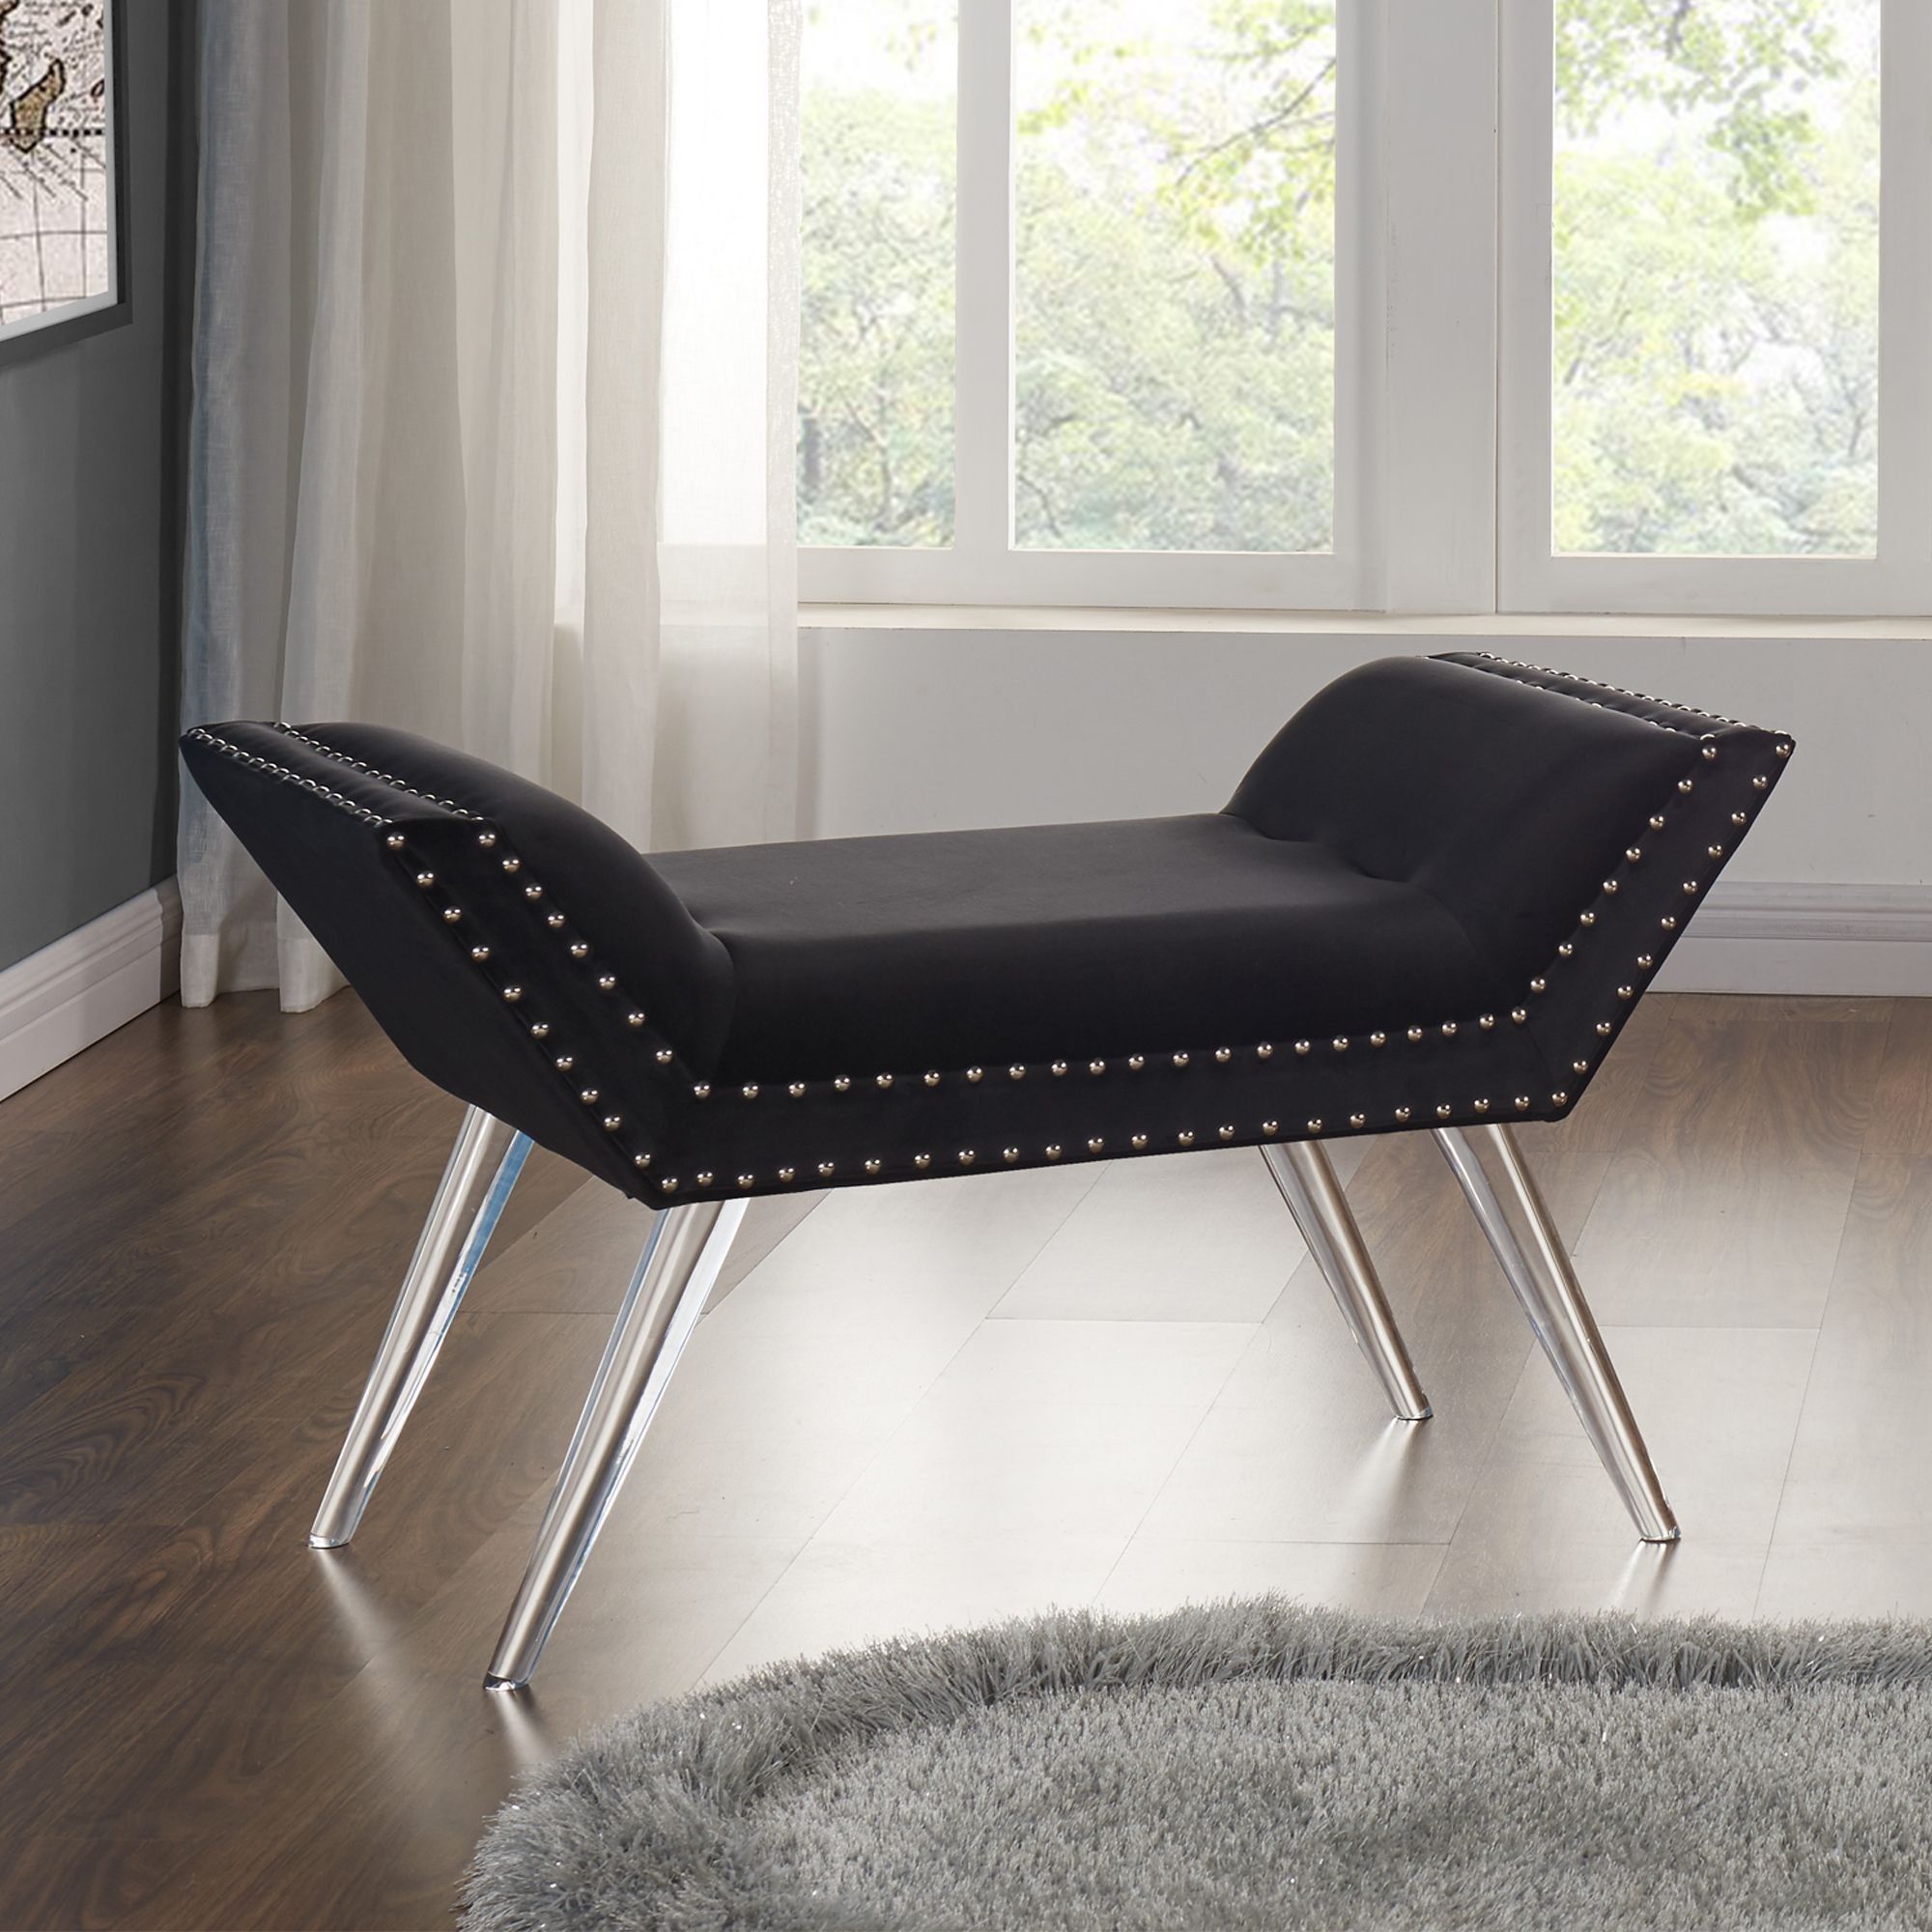 Silas Black Tufted Velvet Ottoman Bench From Armen Living | Coleman Pertaining To Charcoal Gray Velvet Tufted Rectangular Ottoman Benches (View 16 of 19)